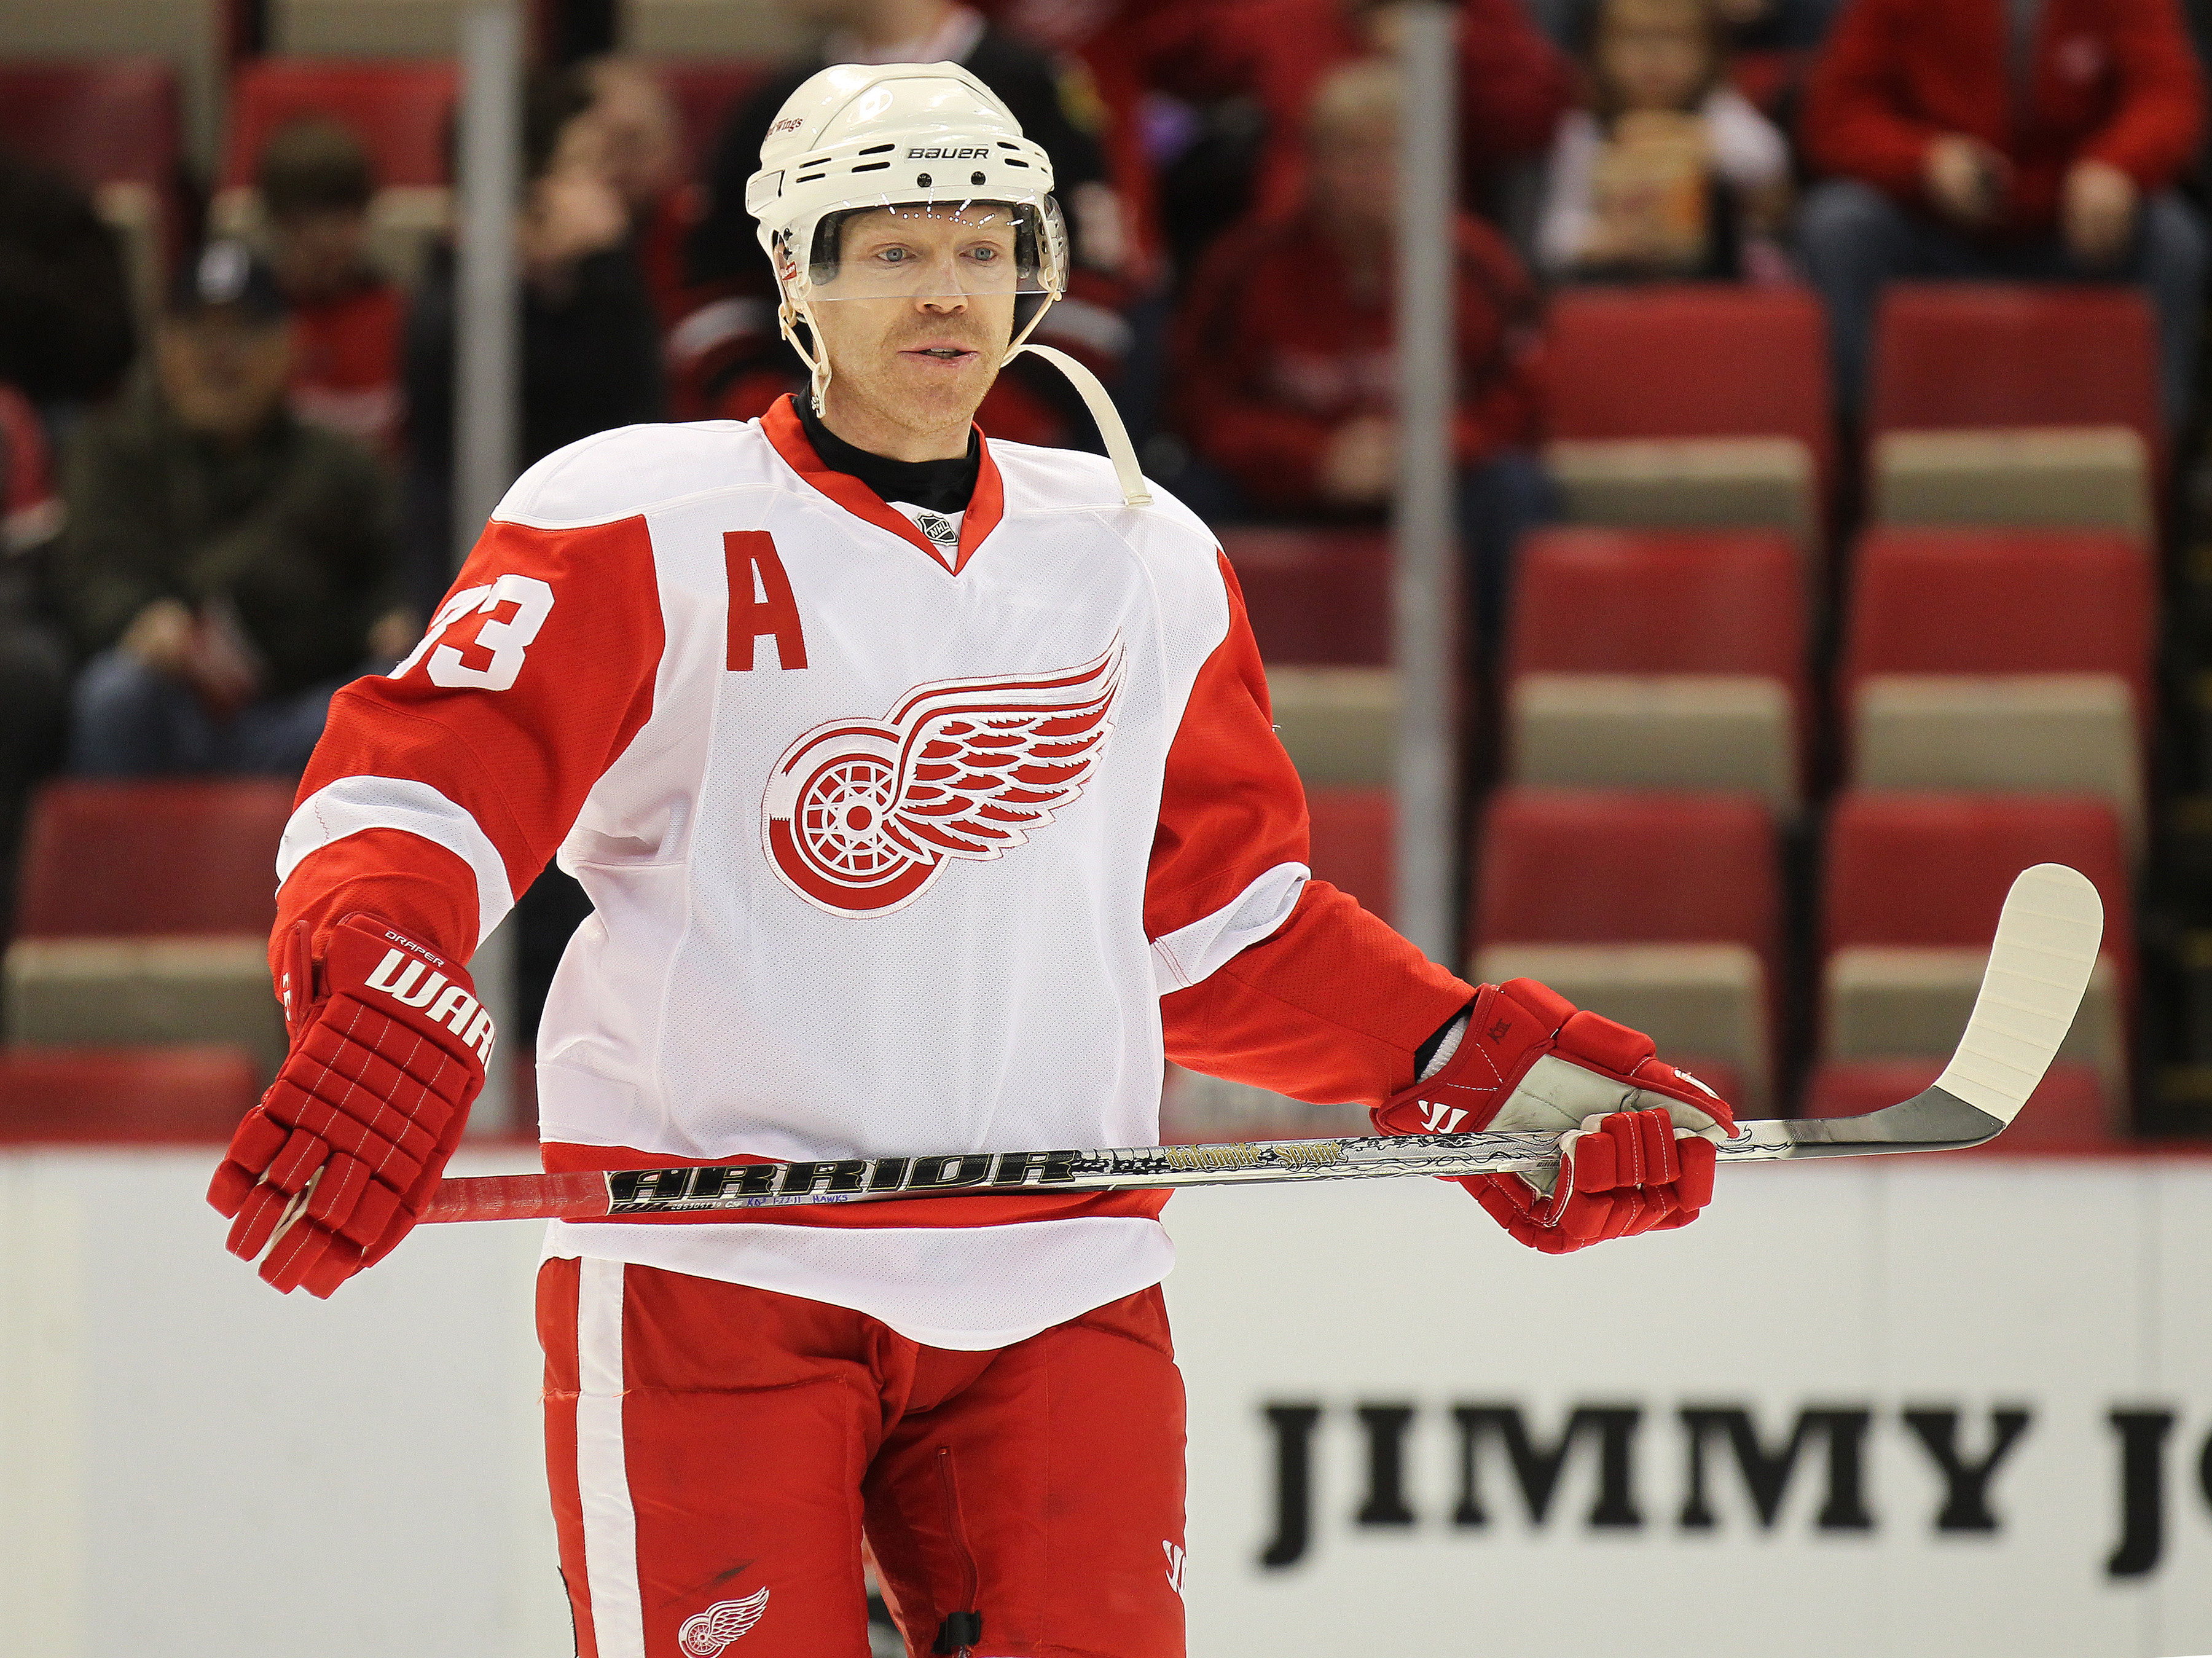 Lidstrom stars at 40 for Red Wings - The San Diego Union-Tribune